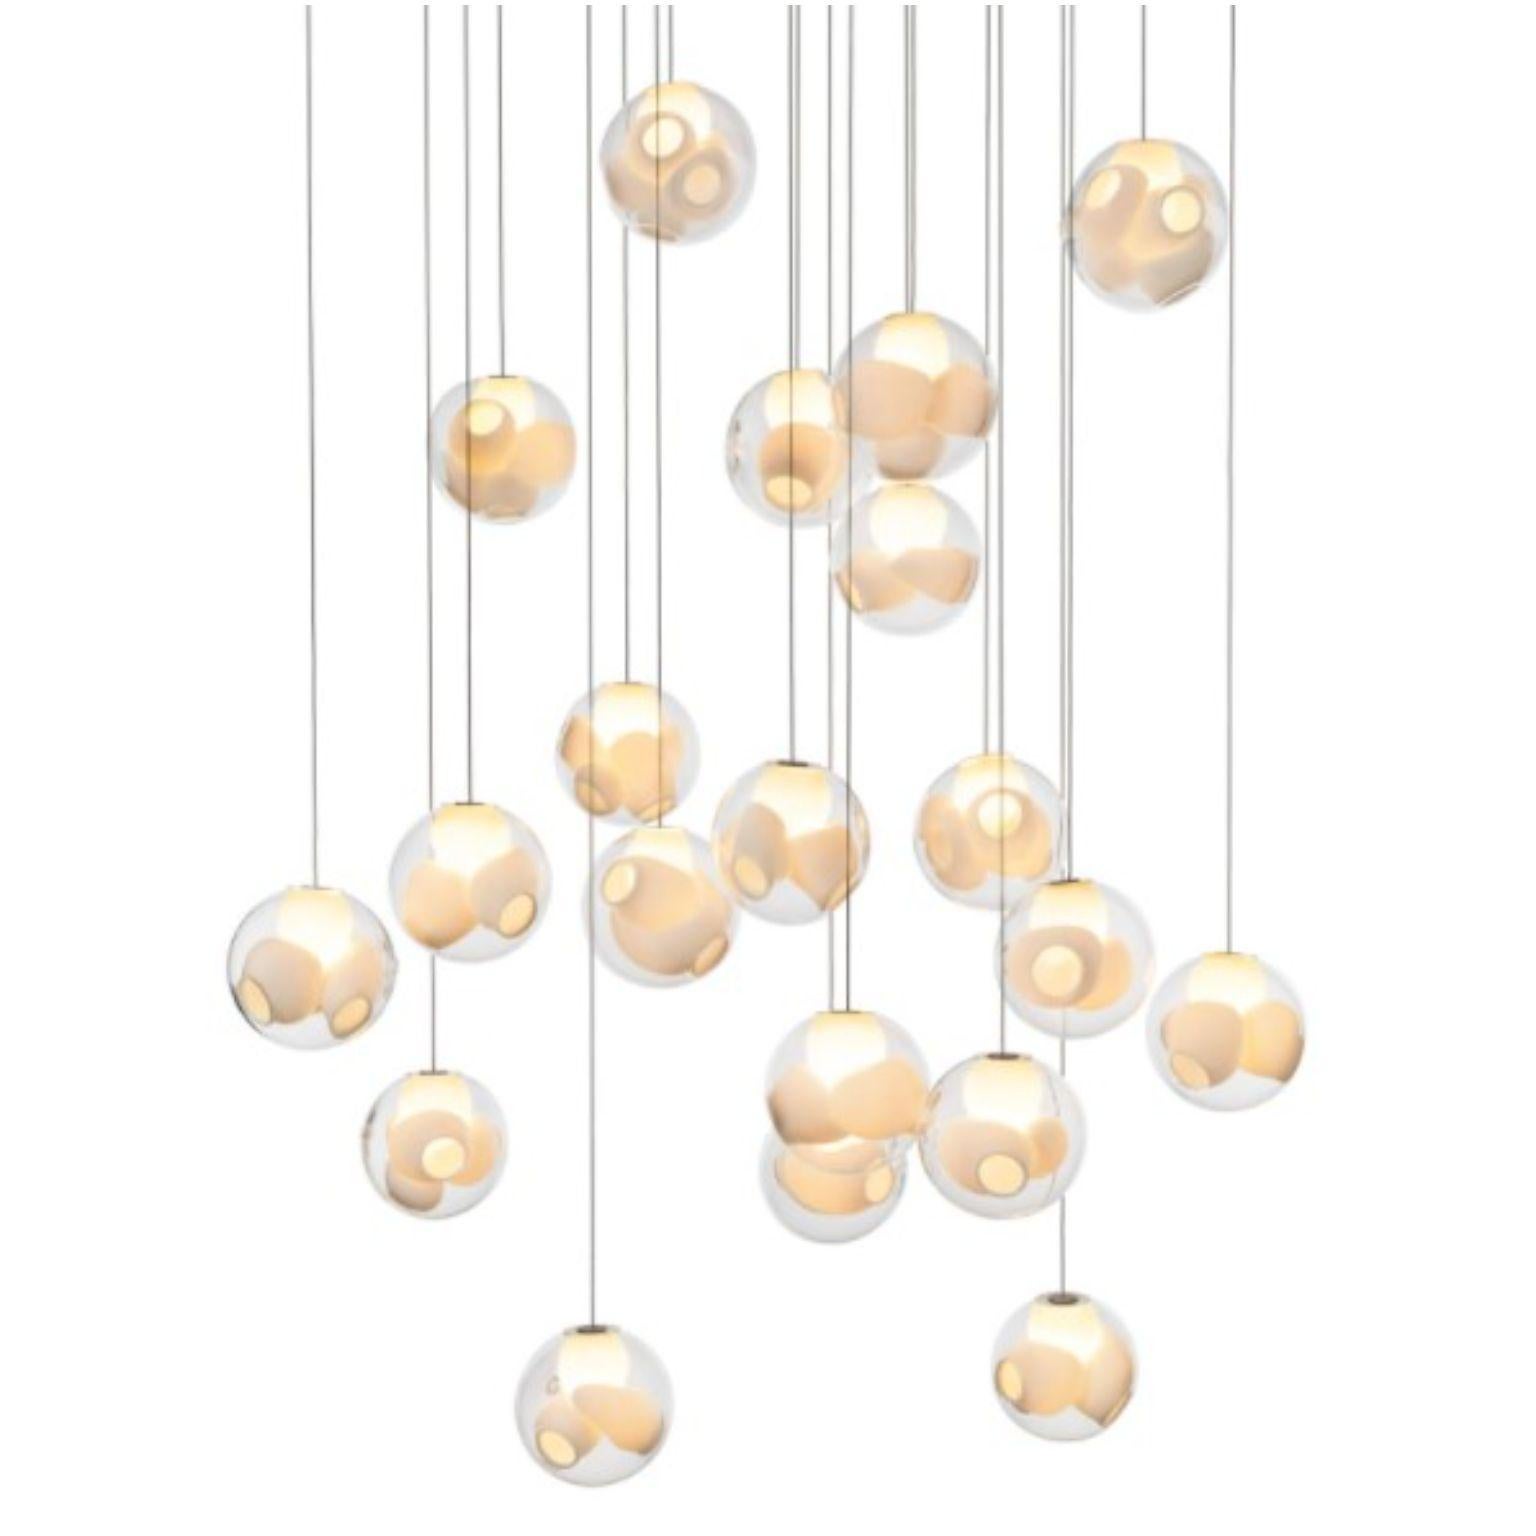 38.20 pendant by Bocci
Dimensions: D 132 x W 44.4 x H 300 cm
Materials: white powder coated rectangular canopy
Weight: 70 kg
Also available in different dimensions and models.

All our lamps can be wired according to each country. If sold to